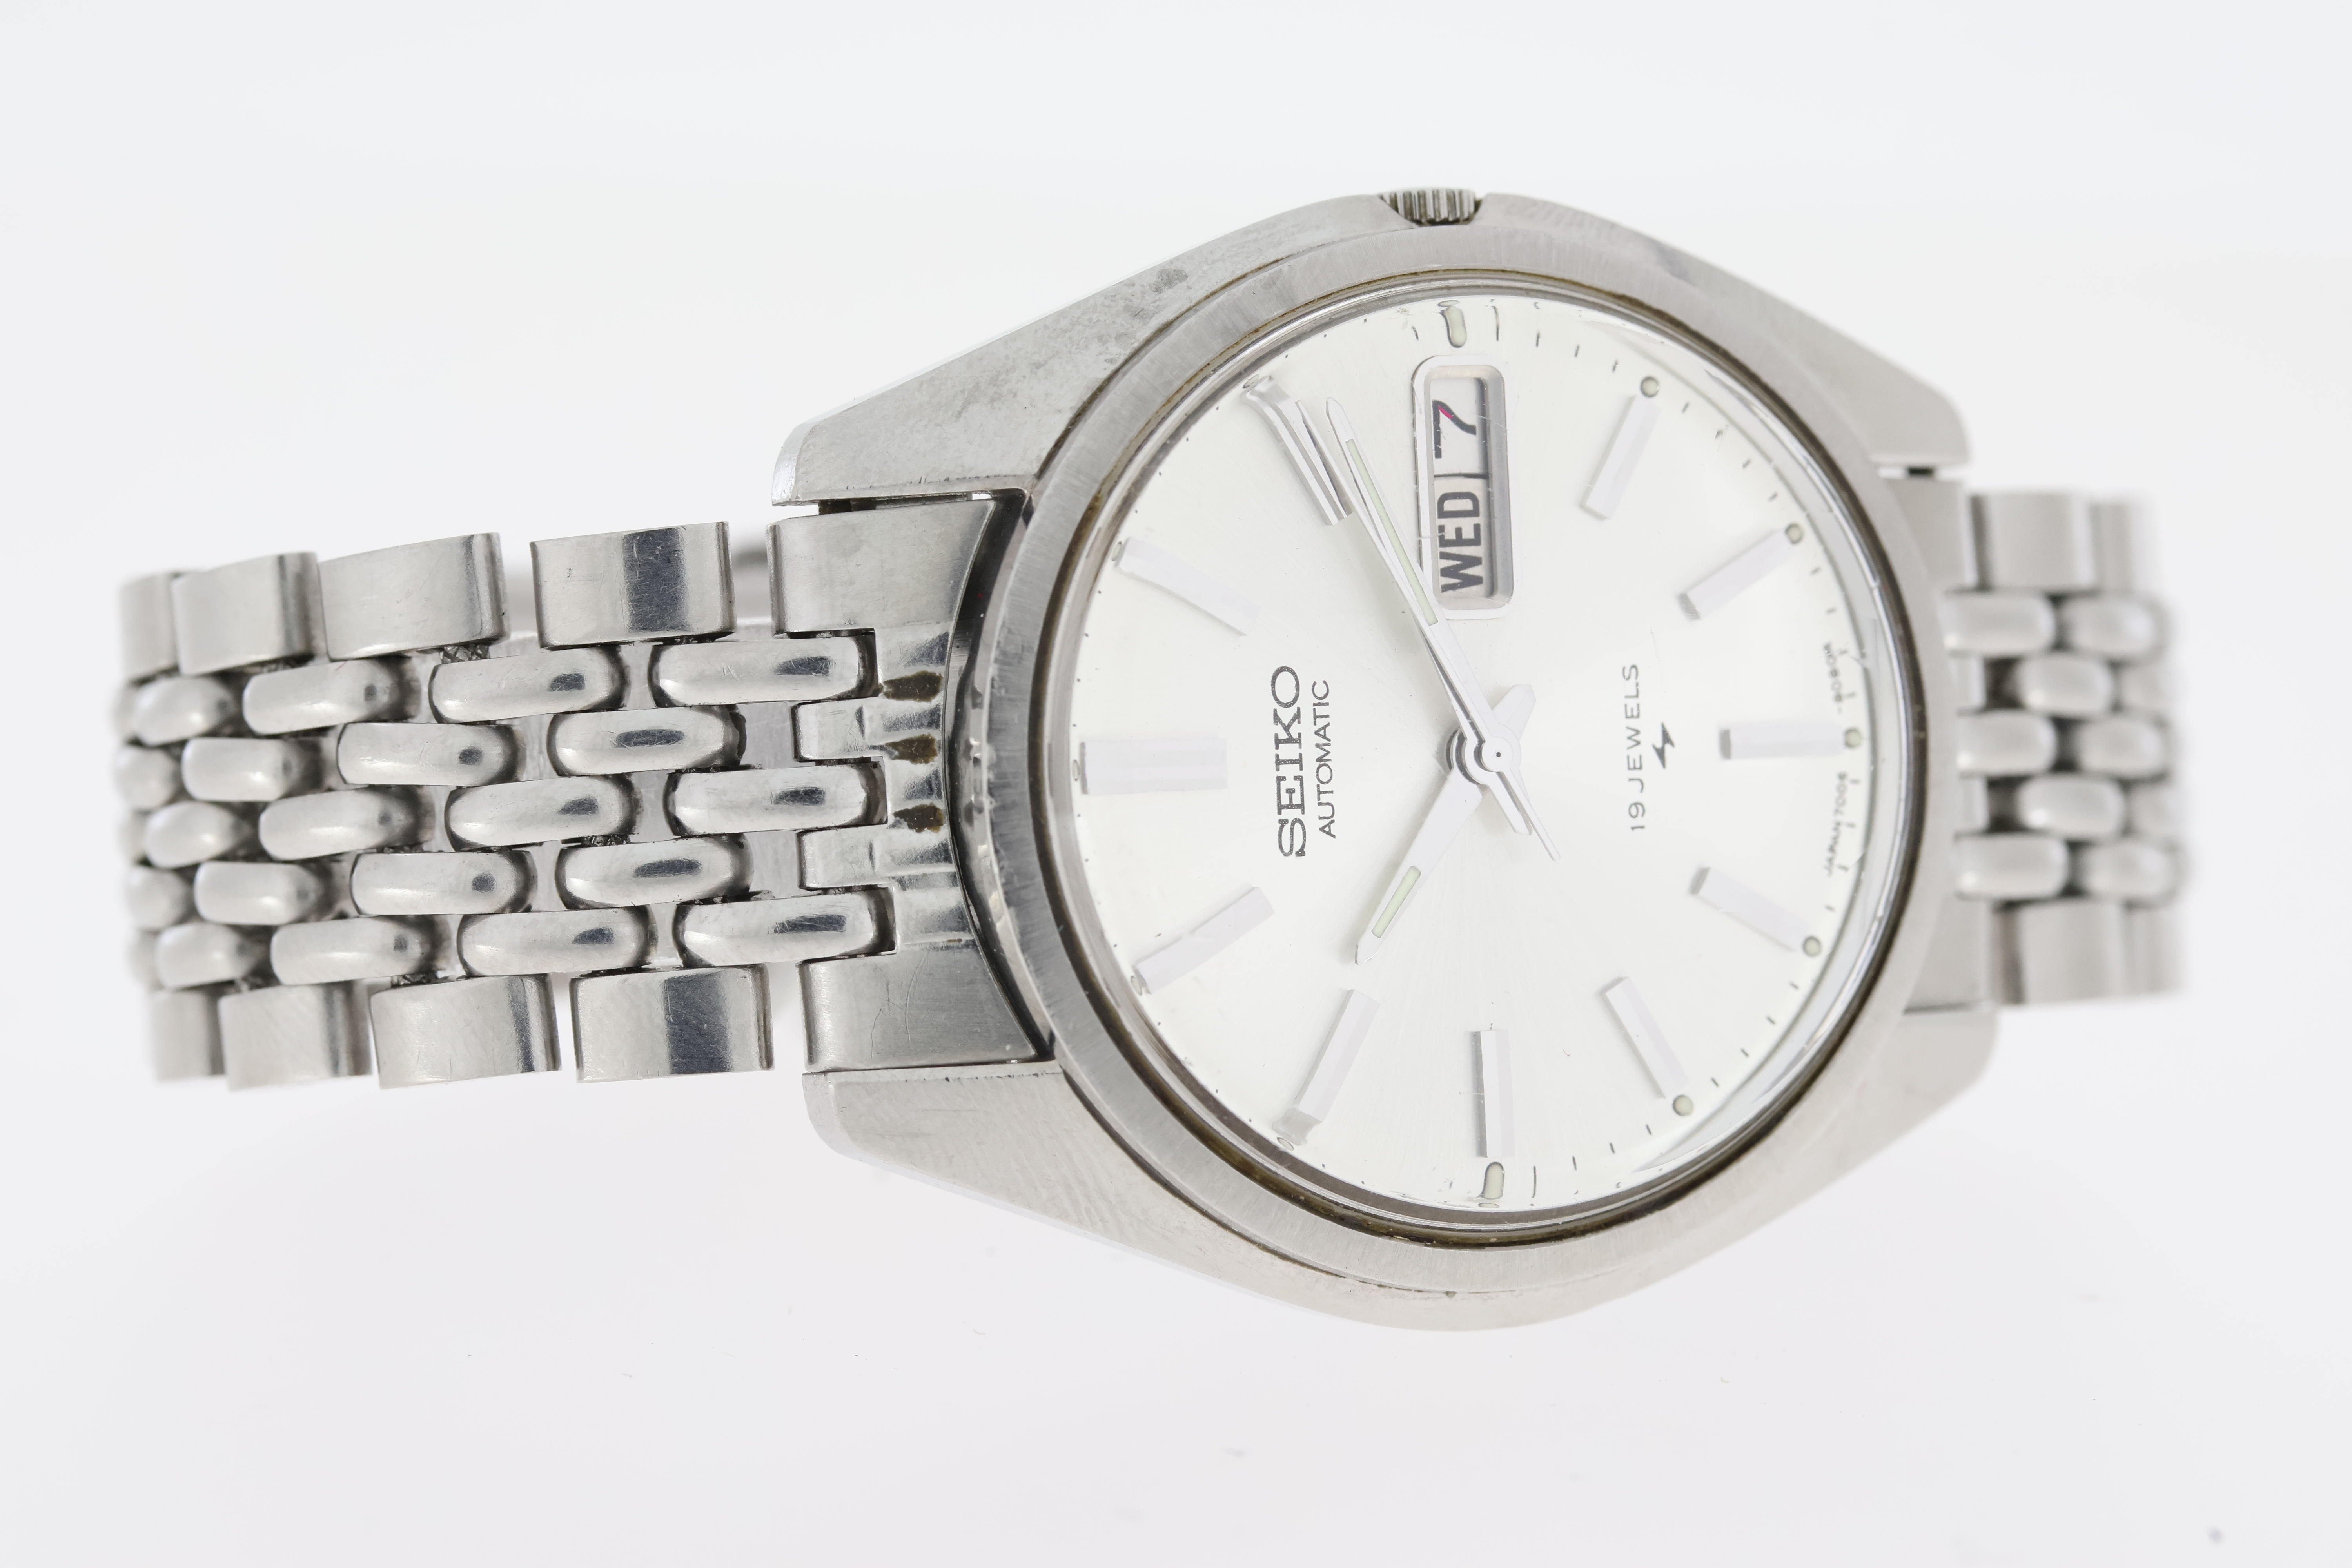 VINTAGE SEIKO 7006 AUTOMATIC WATCH - Image 3 of 4